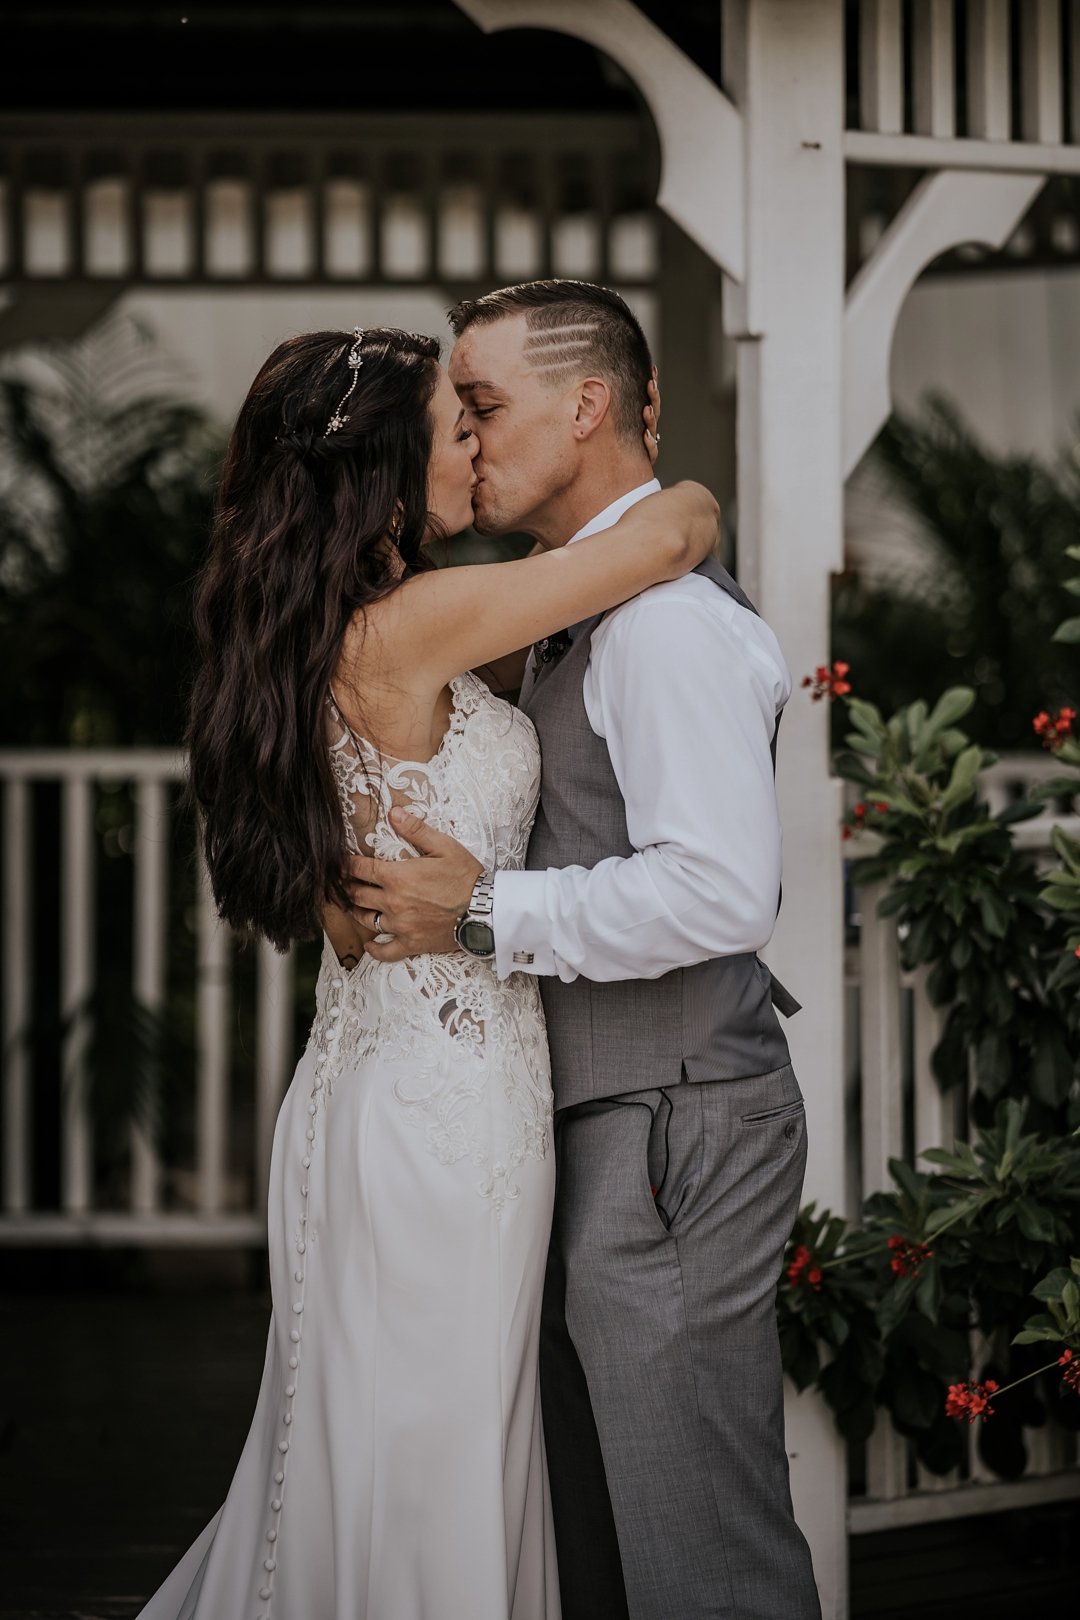 A vintage elegant elopement at Keel and Curly Winery in Plant City by Tampa wedding photographer Tami Keehn.